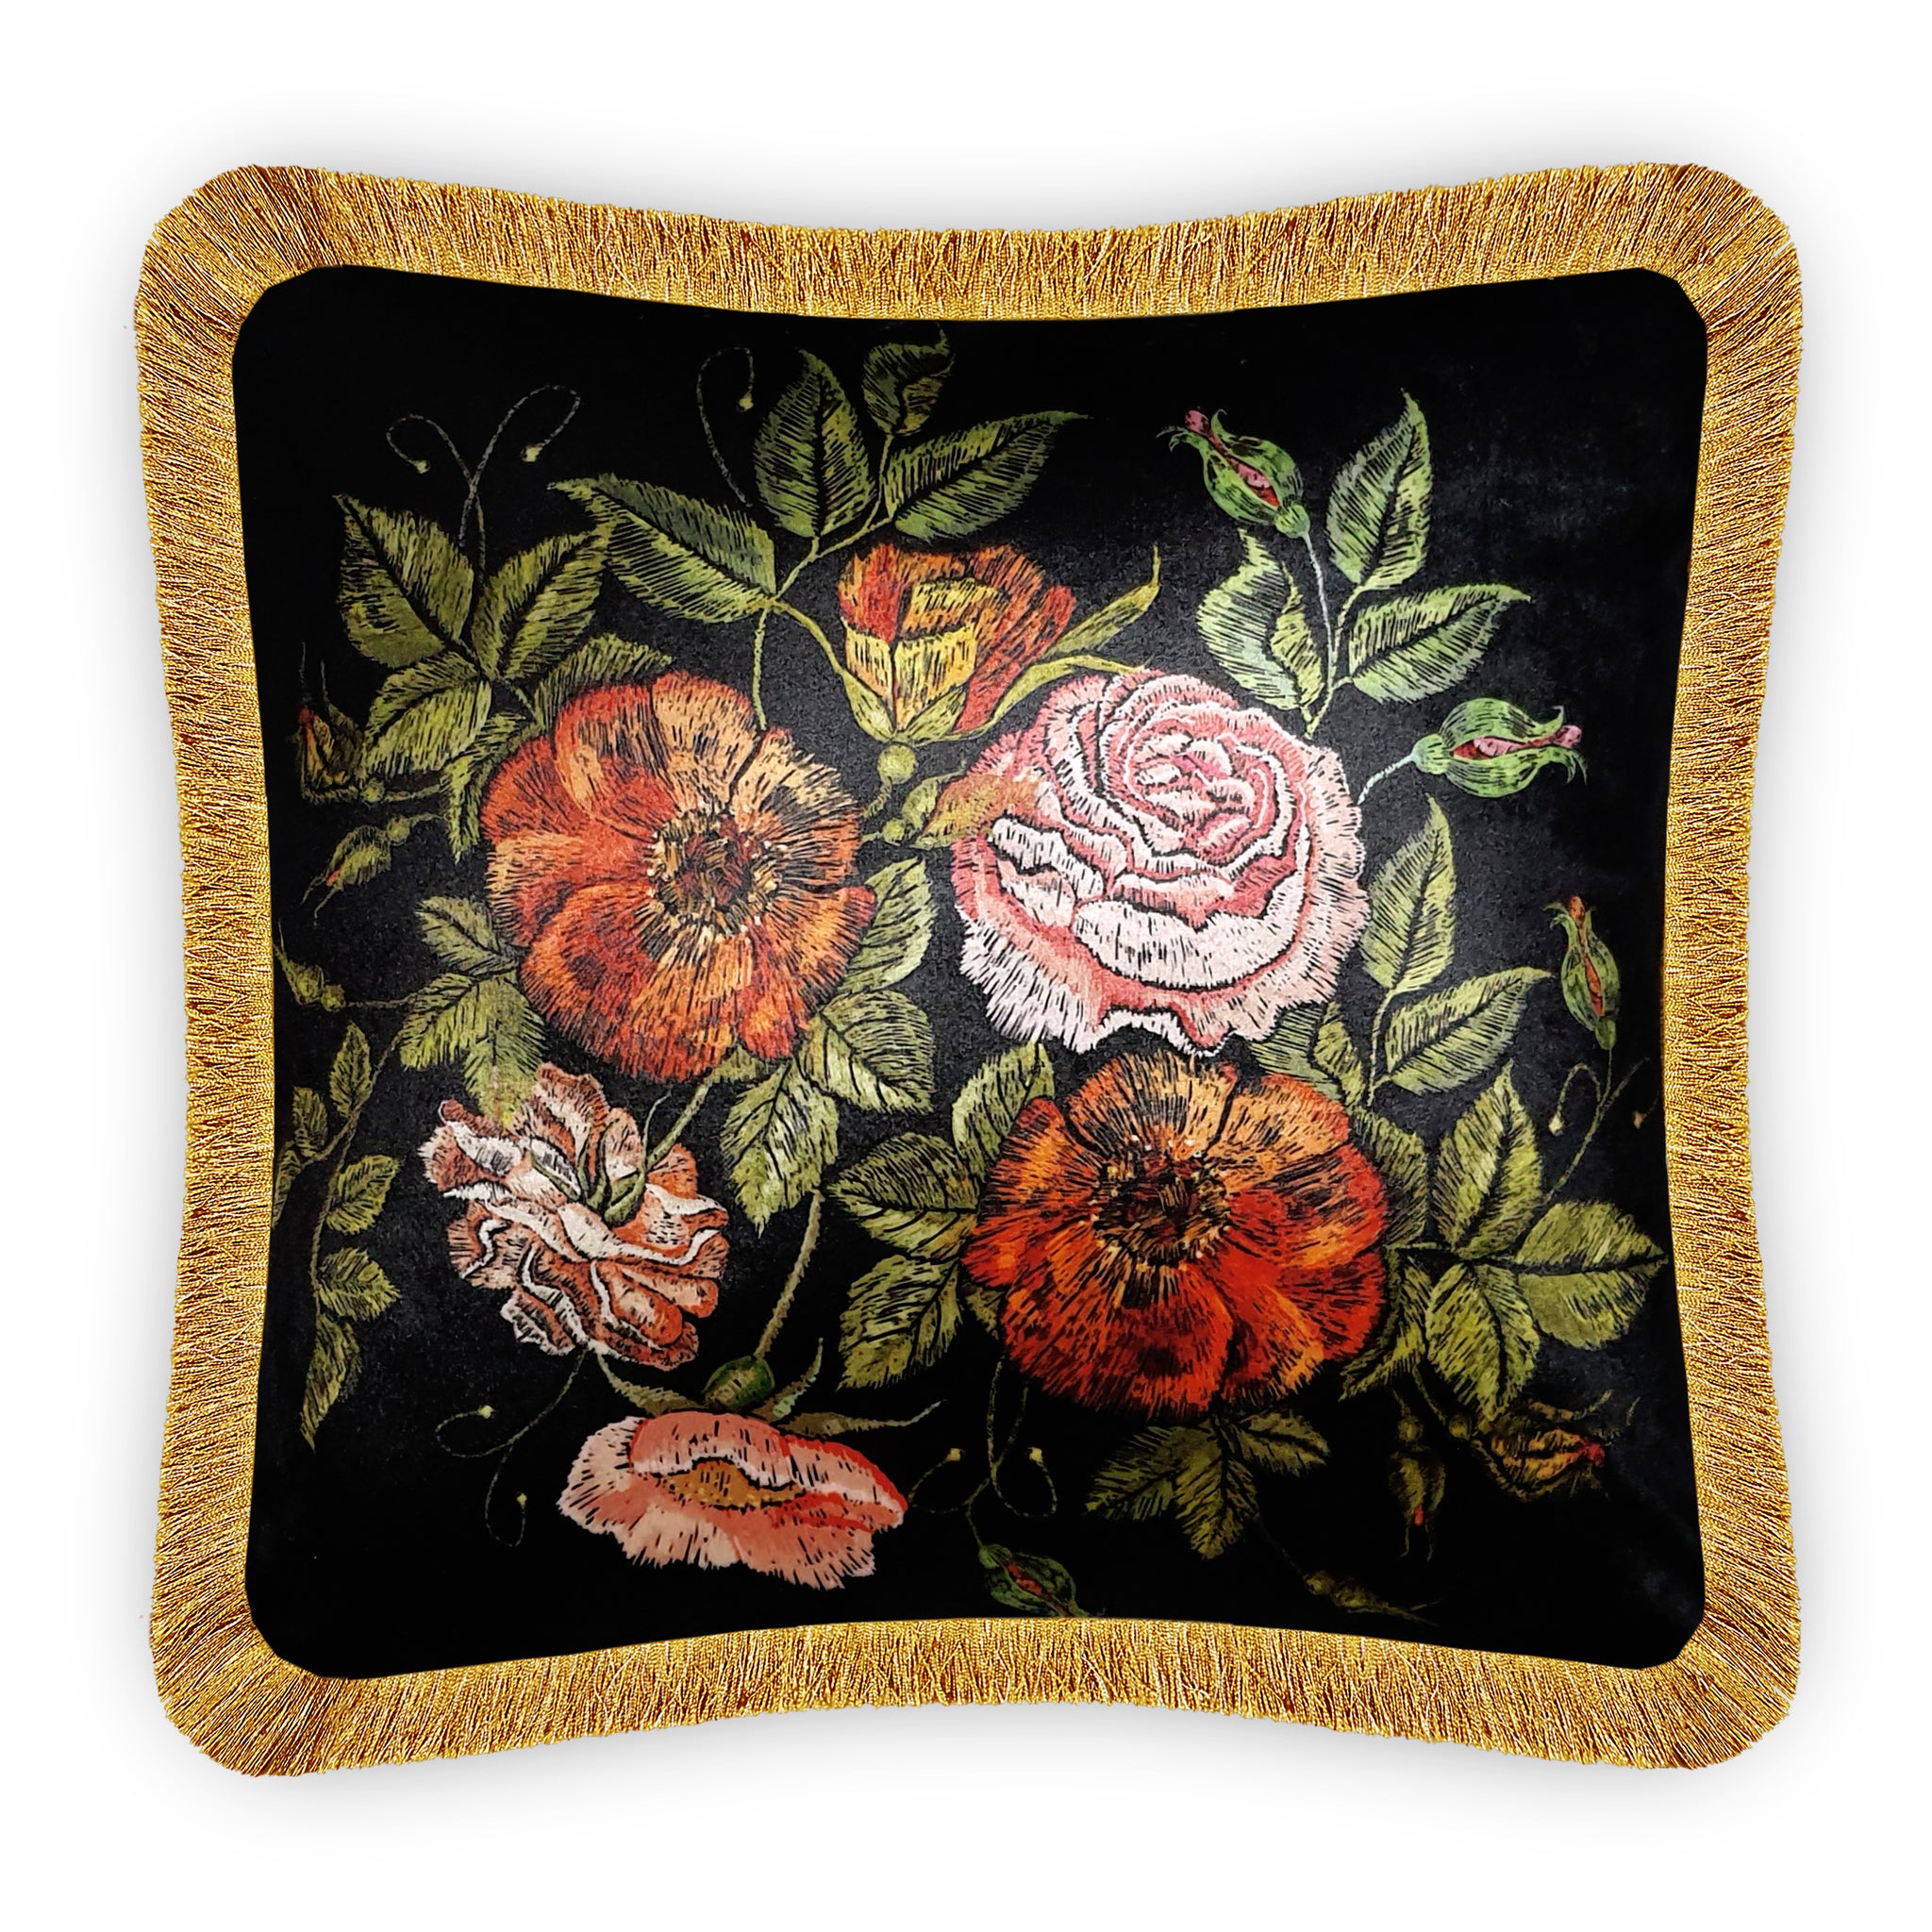  Velvet Cushion Cover Embroidery Imitated Rose Bouquet Decorative Pillowcase Classic Home Decor Throw Pillow for Sofa Chair Couch 45x45 cm 